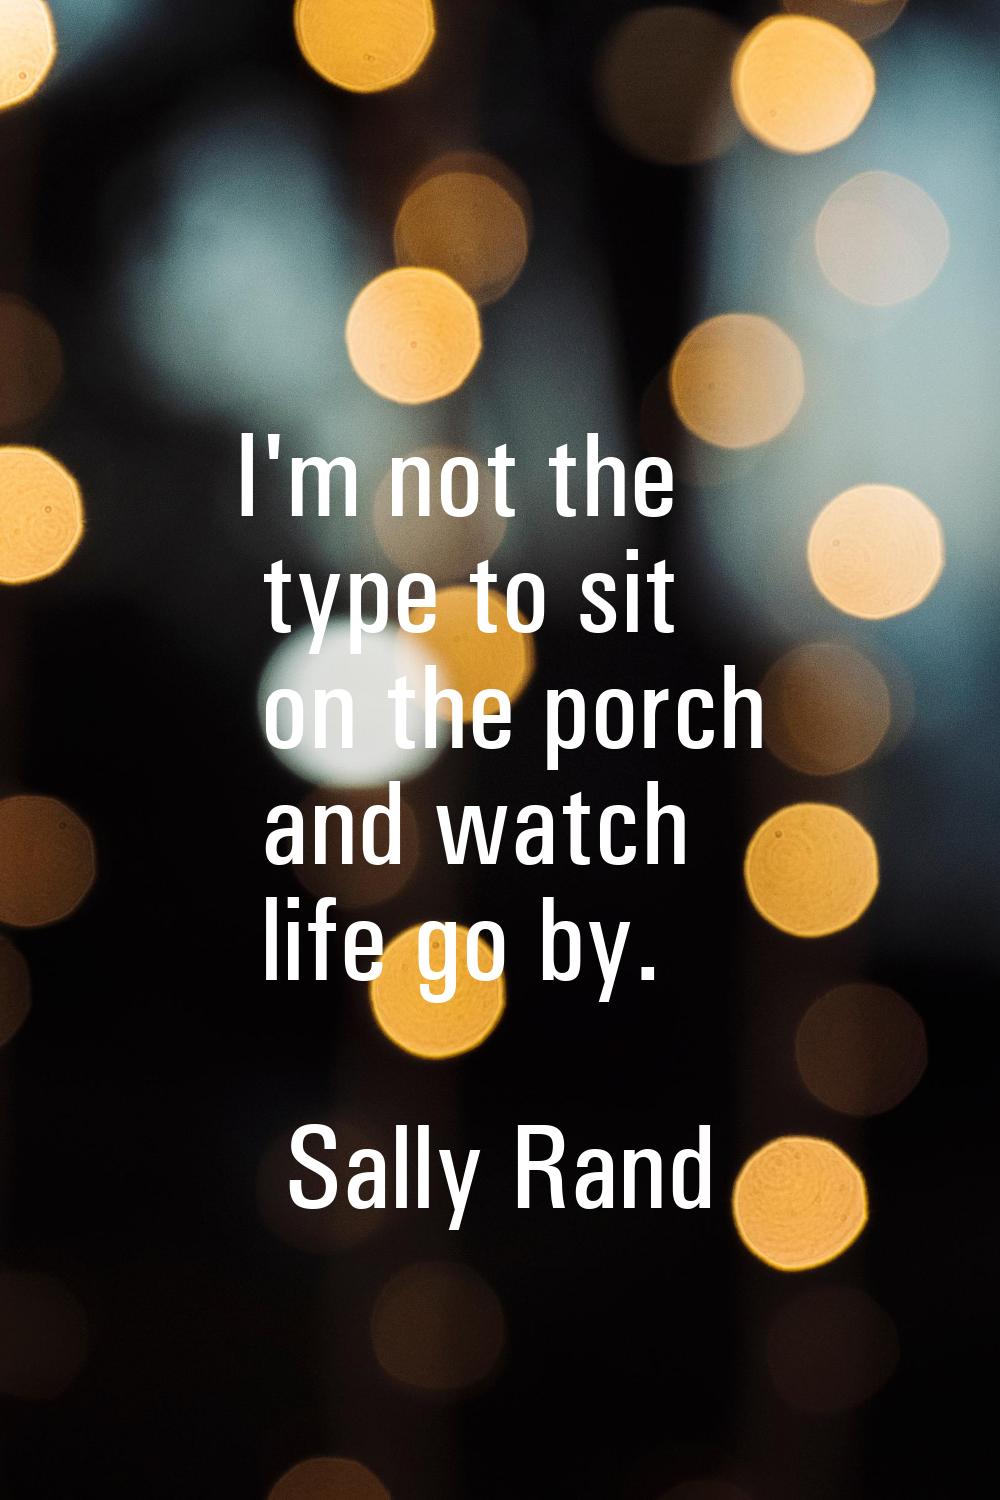 I'm not the type to sit on the porch and watch life go by.